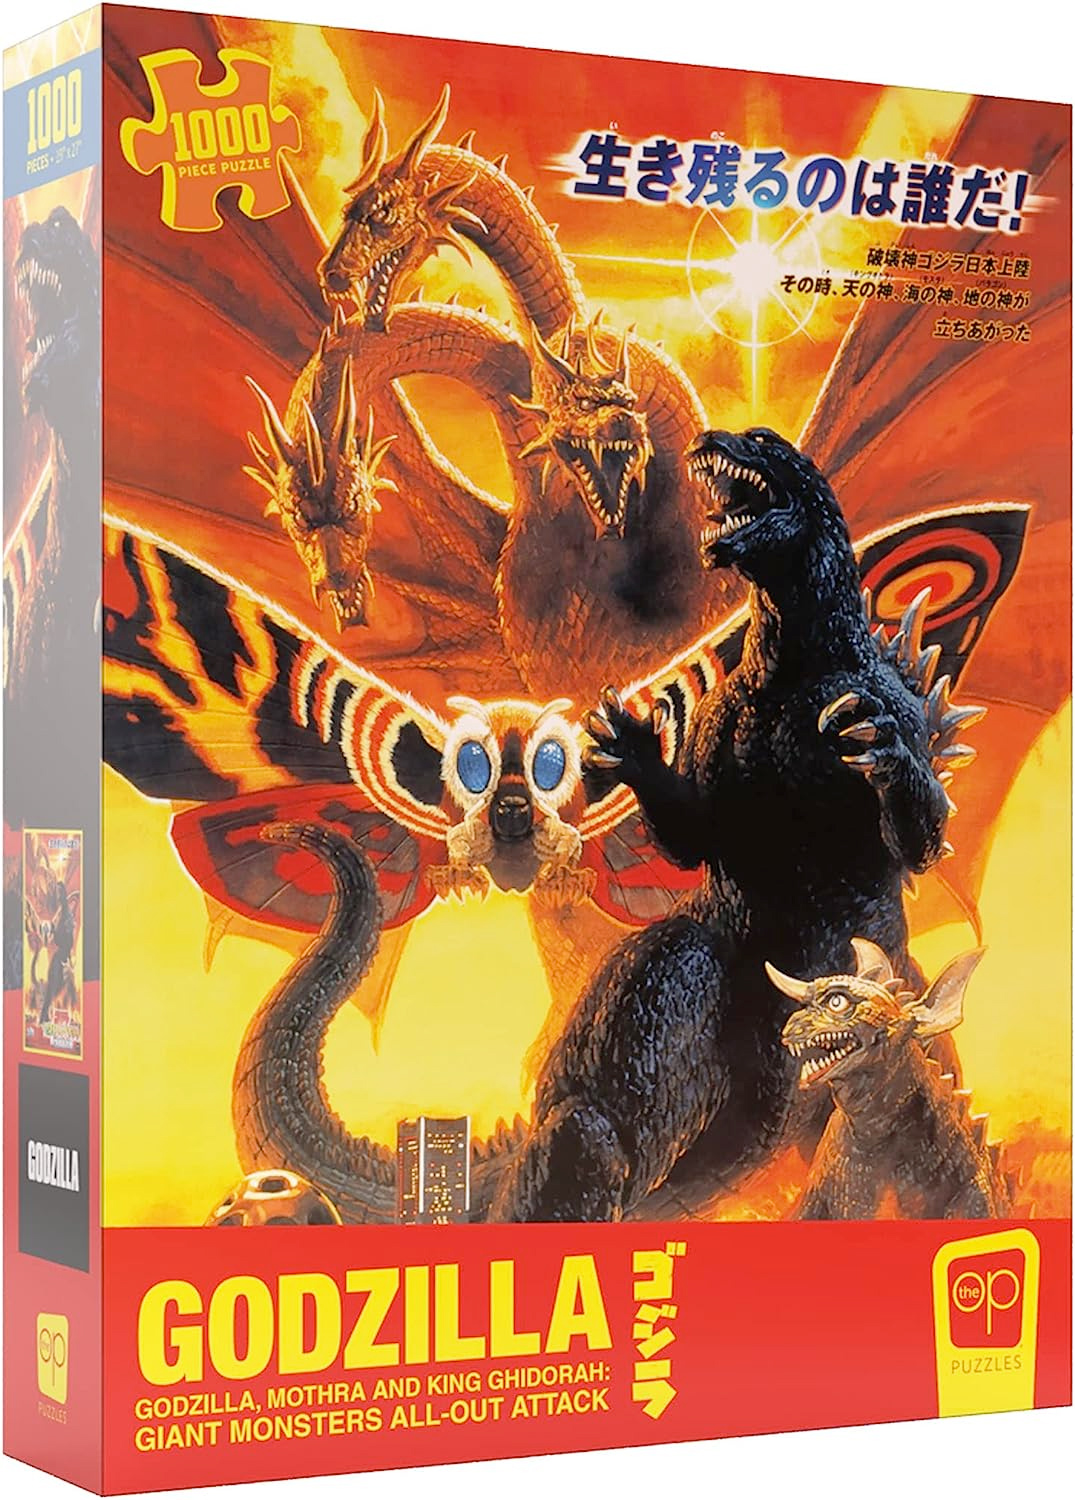 Quebra-Cabeça do Filme Godzilla, Mothra and King Ghidorah: Giant Monsters All-Out Attack